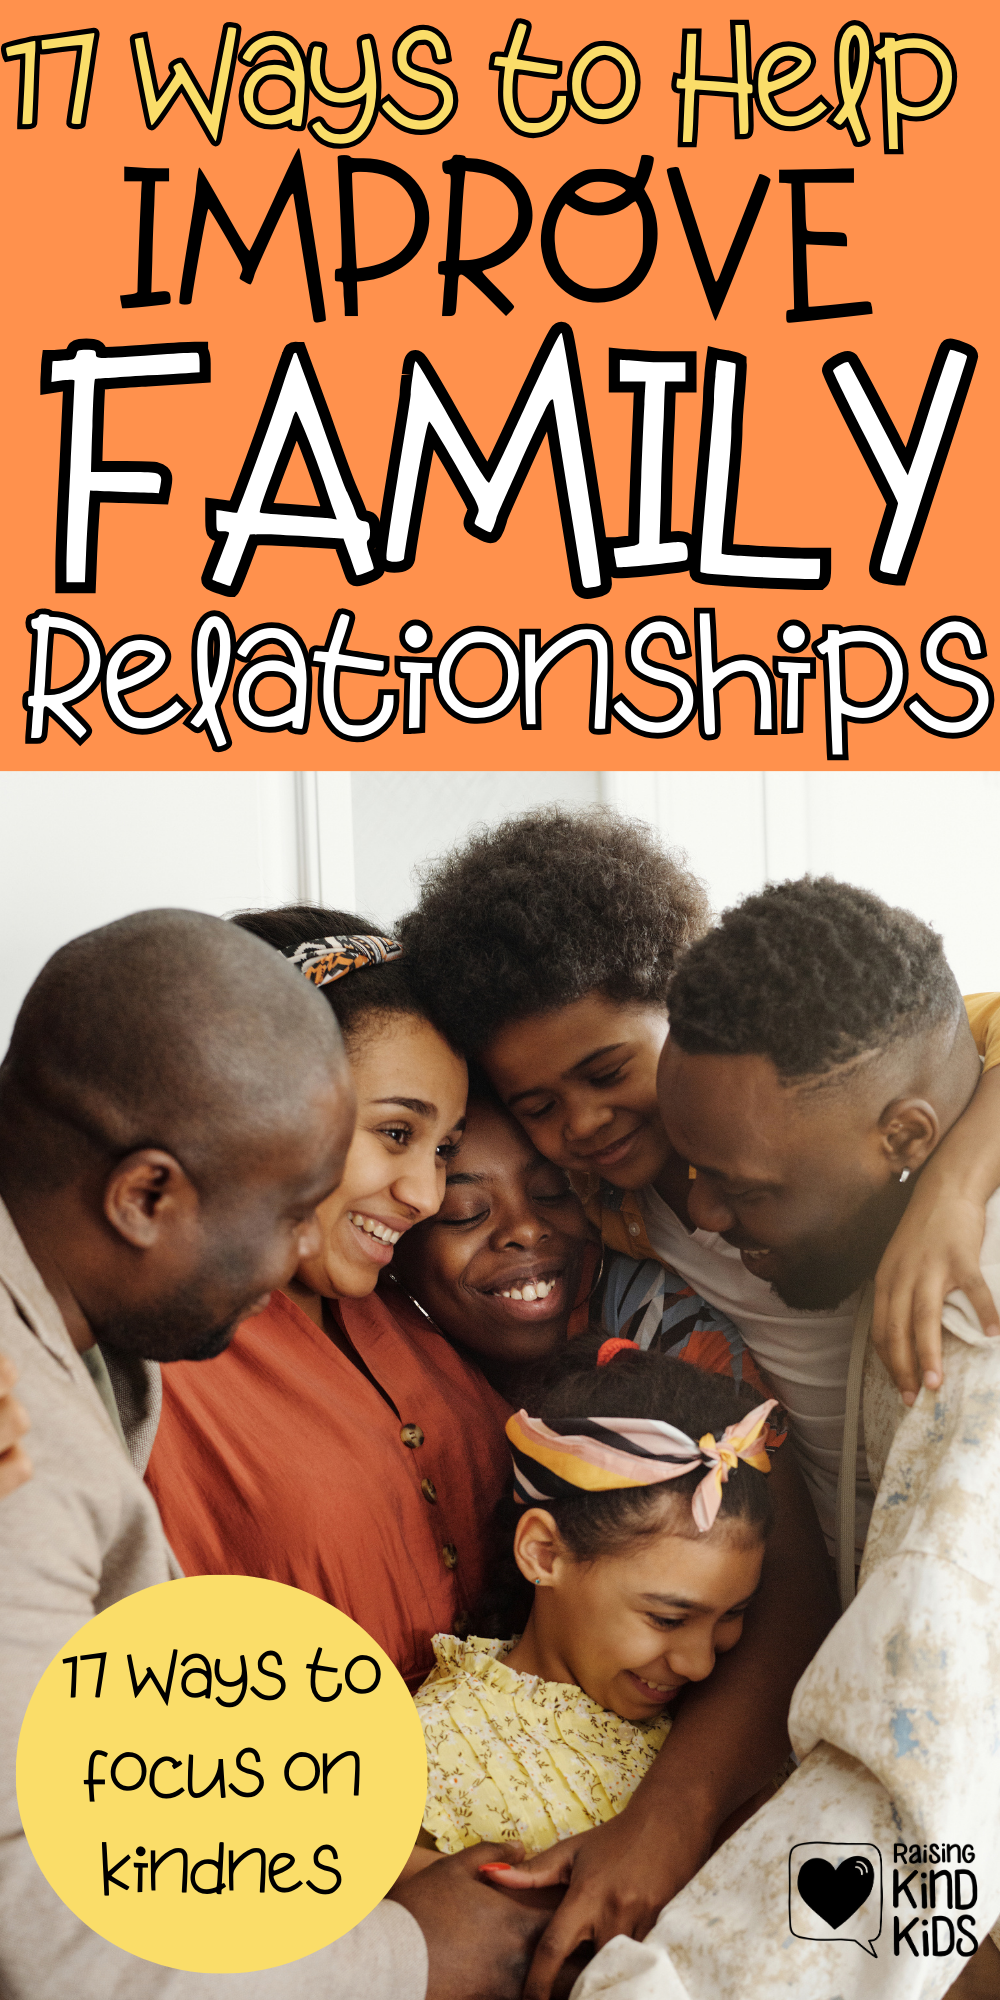 Use these 17 strategies to improve family relationships with more kindness, empathy and connection and create a home where everyone feels safe, loved and wanted. 